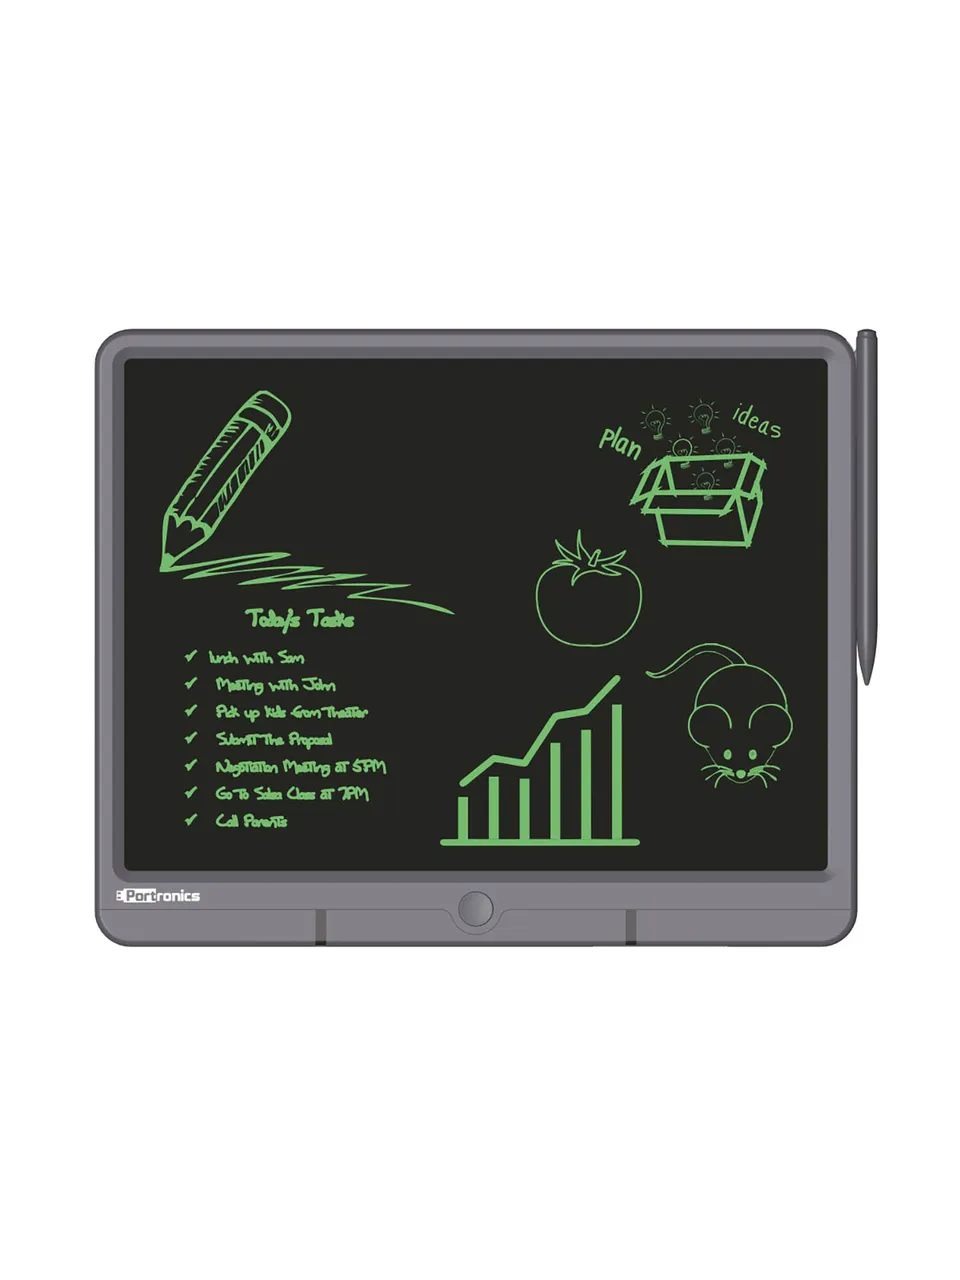 Portronics Ruffpad 15-Re-Writable LCD Writing Pad with Content Safety Button